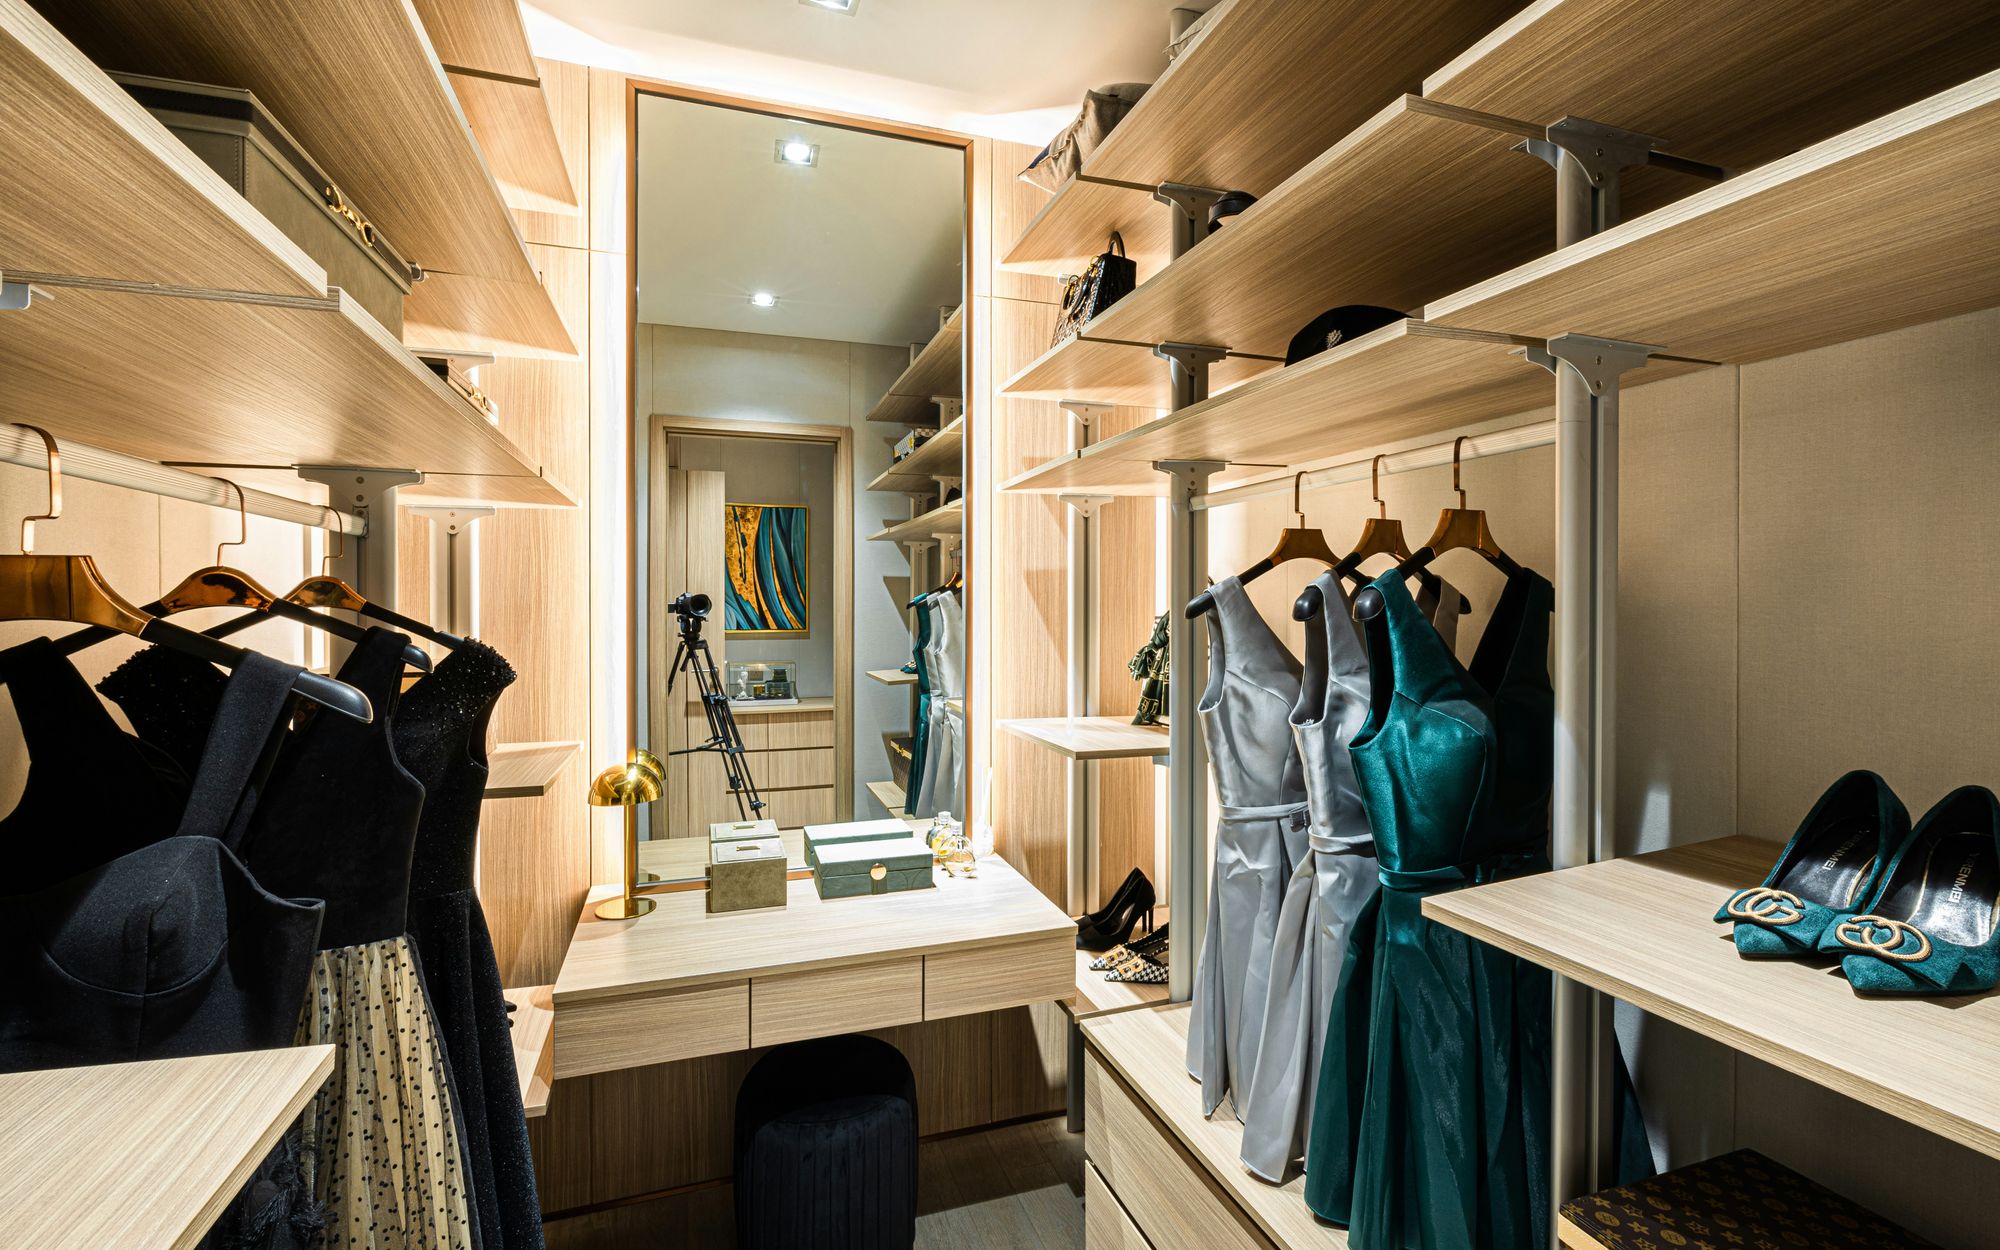 Technology has made its way into modern closets